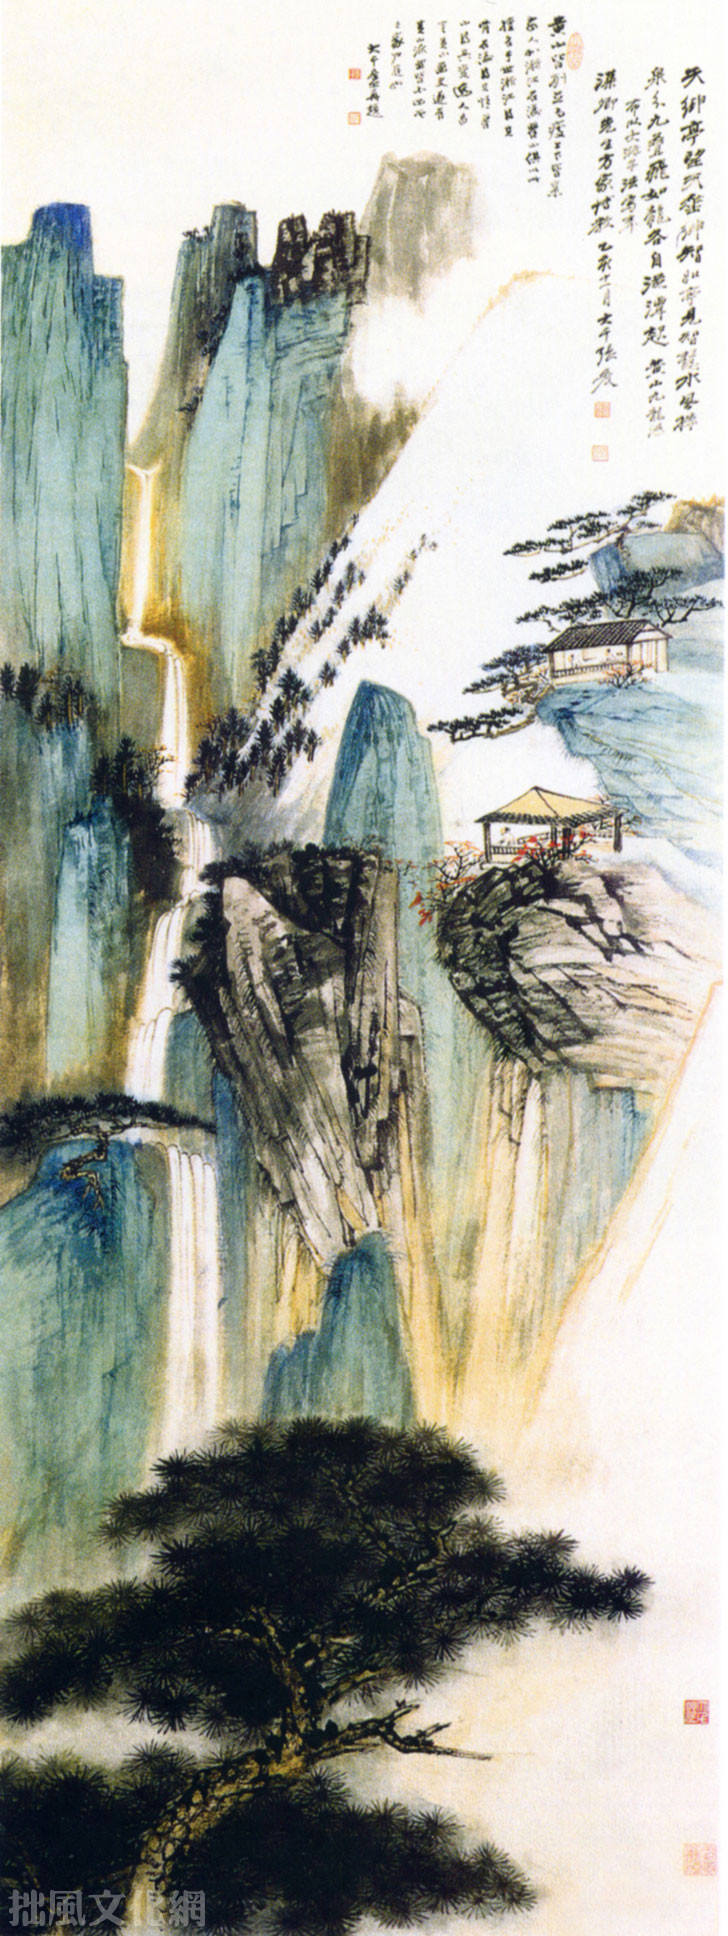 Chinese Landscape Paintings
 Bonsai Style Chinese Penjing and Landscape Paintings